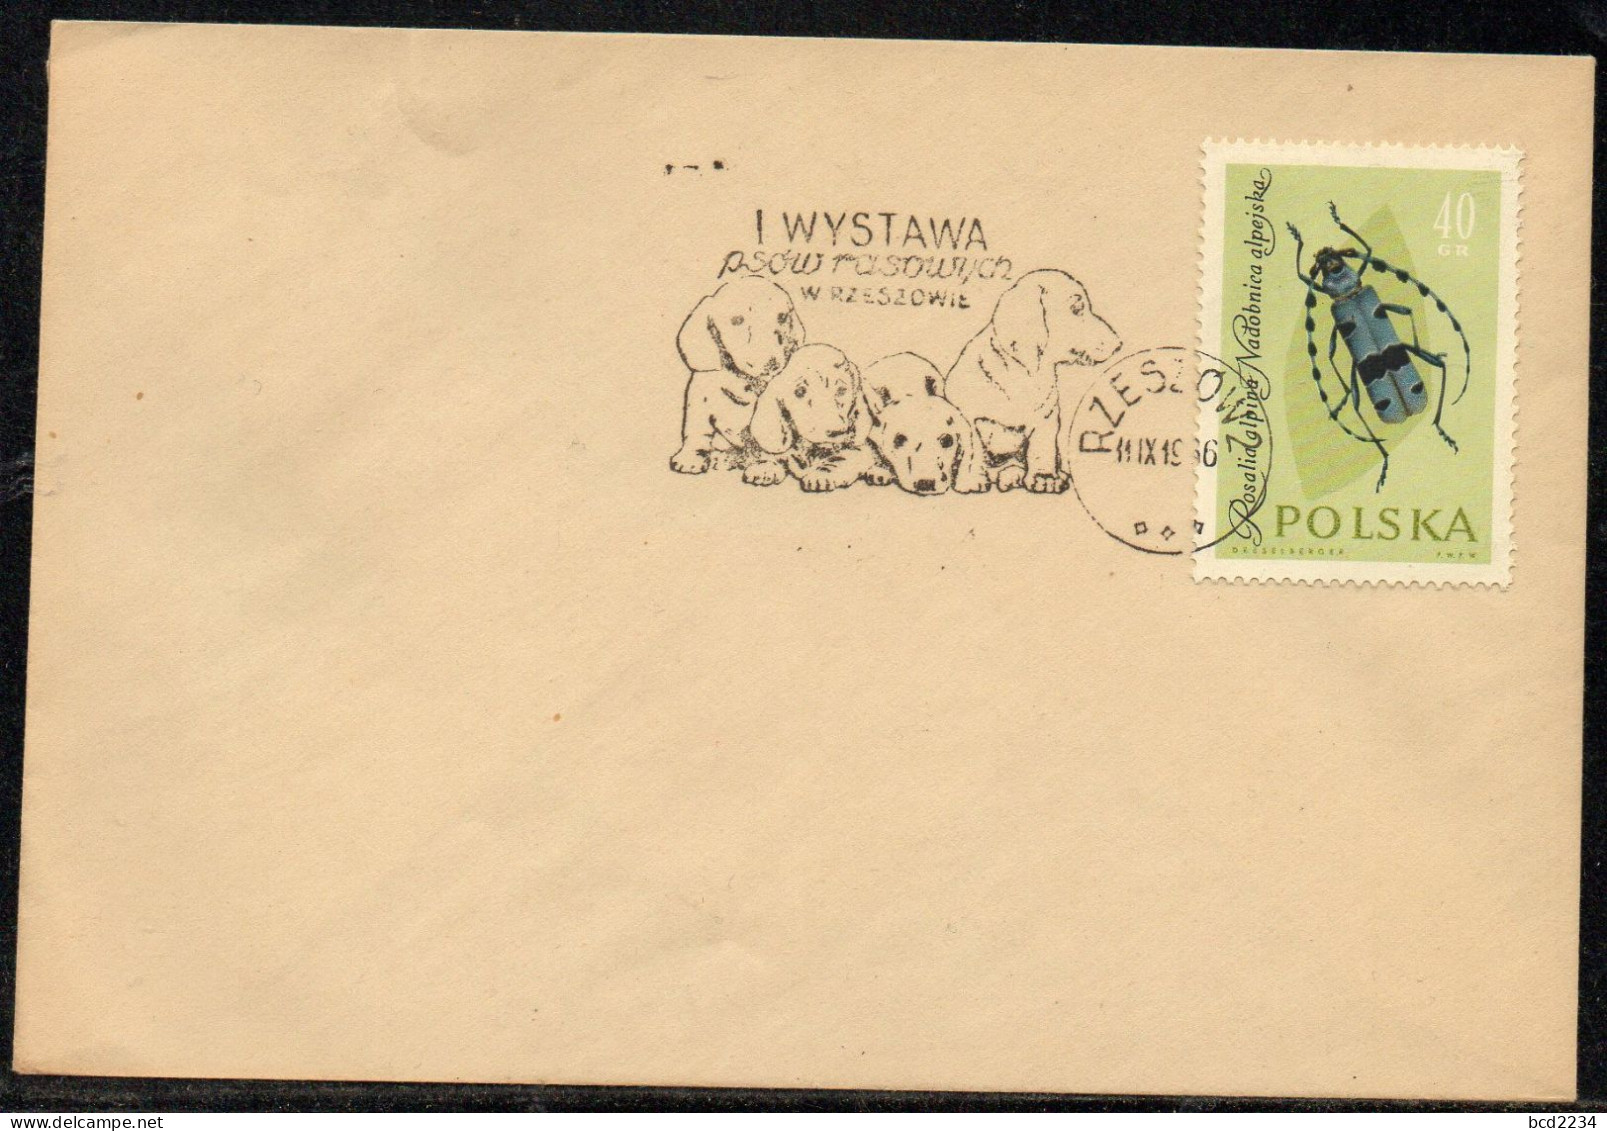 POLAND 1966 I PEDIGREE DOG SHOW RZESZOW CANCEL ON COVER DOGS - Chiens